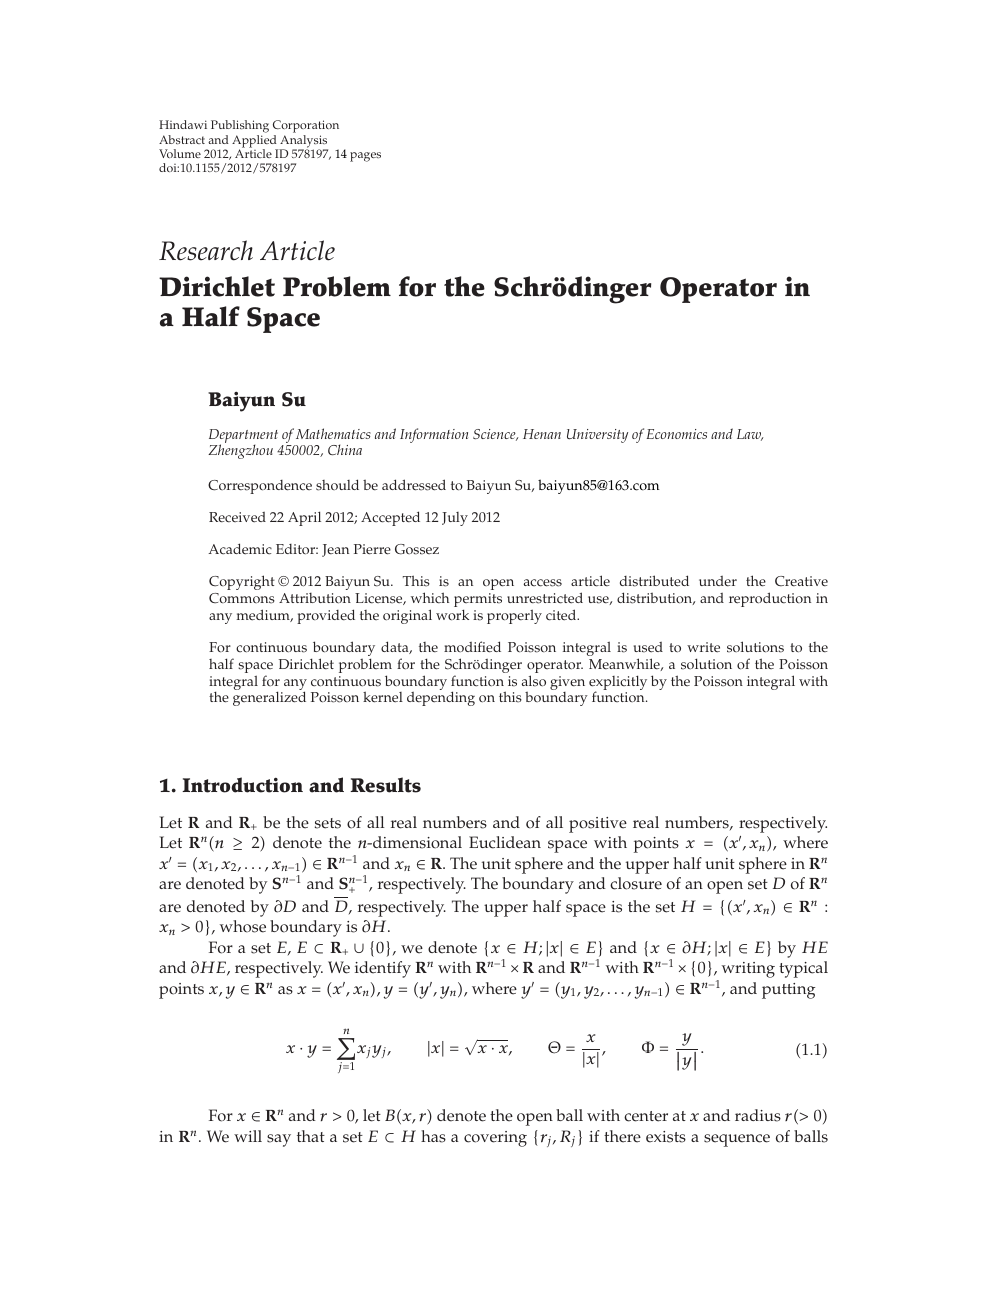 Dirichlet Problem For The Schrodinger Operator In A Half Space Topic Of Research Paper In Mathematics Download Scholarly Article Pdf And Read For Free On Cyberleninka Open Science Hub